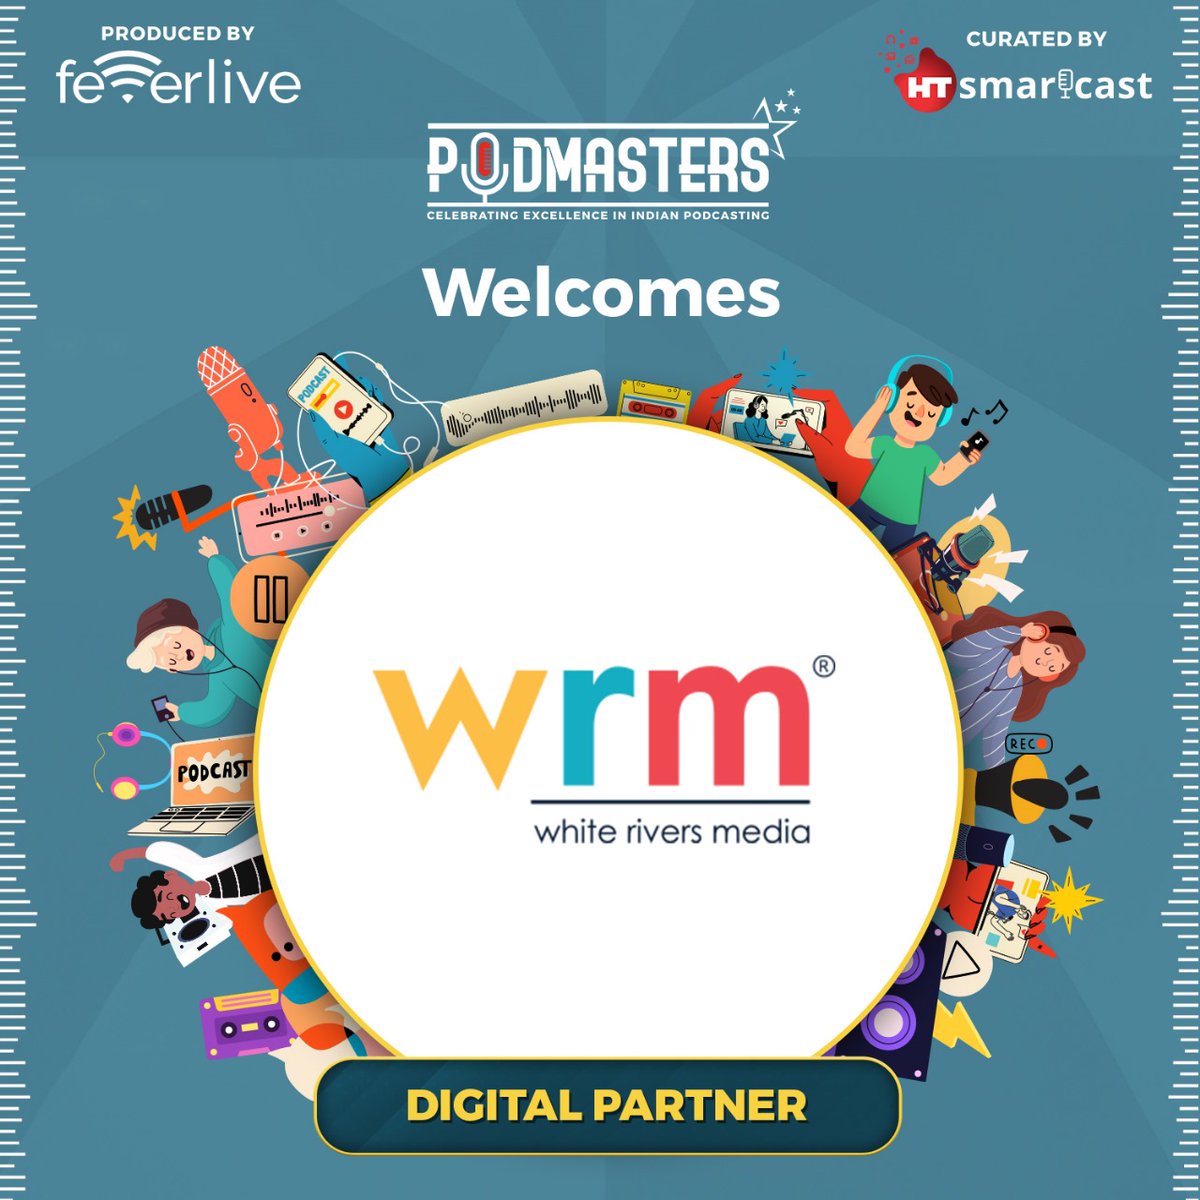 Joining hands together to amp up the Indian podcasting game at #Podmasters2024, welcoming aboard @WhiteRiversM  as our Digital Partner 🔥                                  #DigitalPartner #PodmastersAwards #IndianPodcasting #IndianPodmasters #Podcast